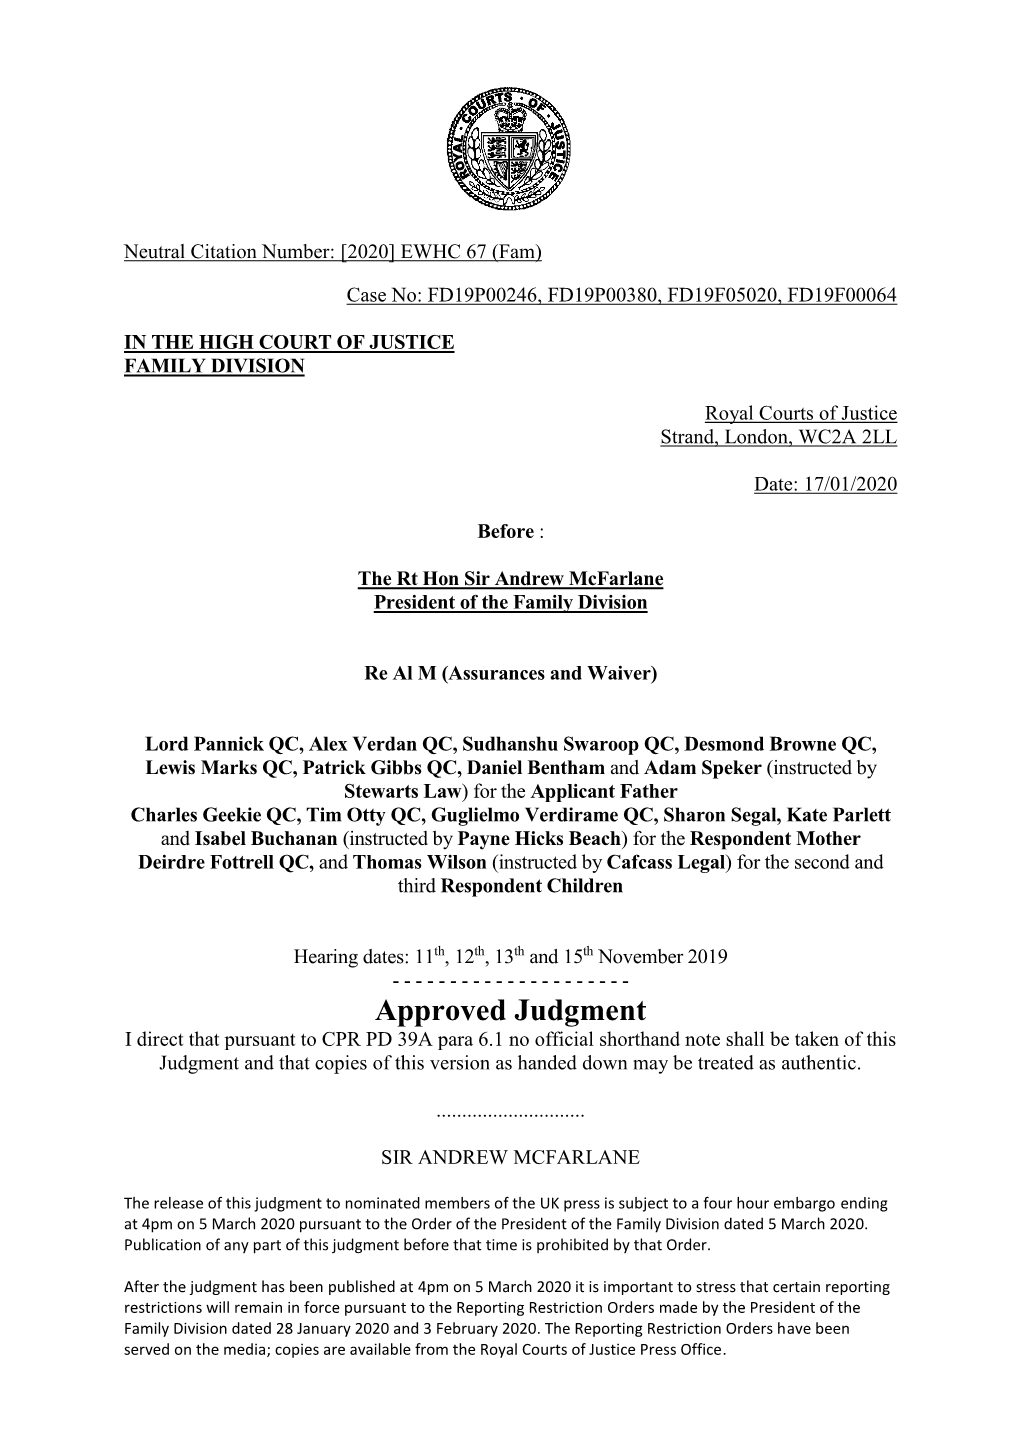 Al M Assurances and Waiver APPROVED Judgment 170120